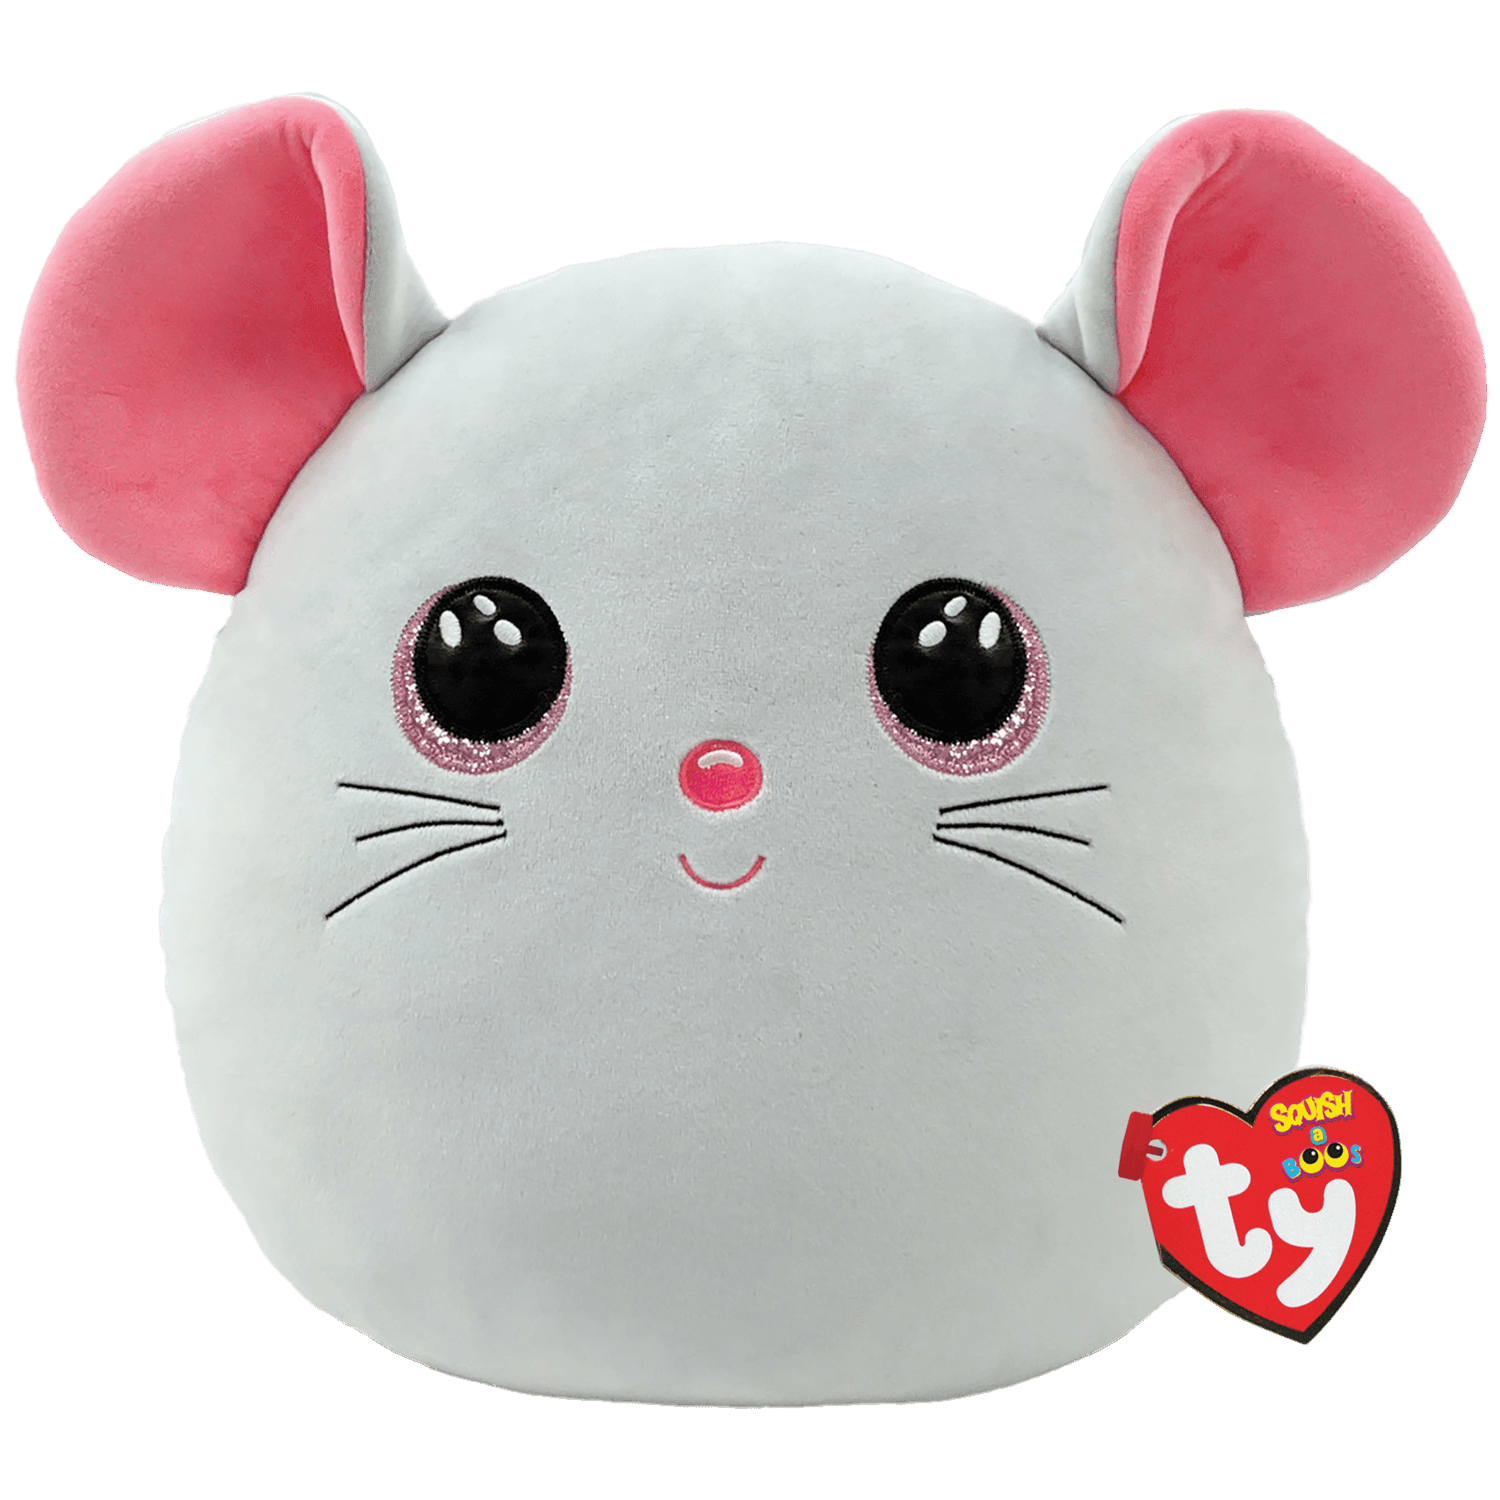 Squish-a-Boo Catnip Grey Mouse Large 14"